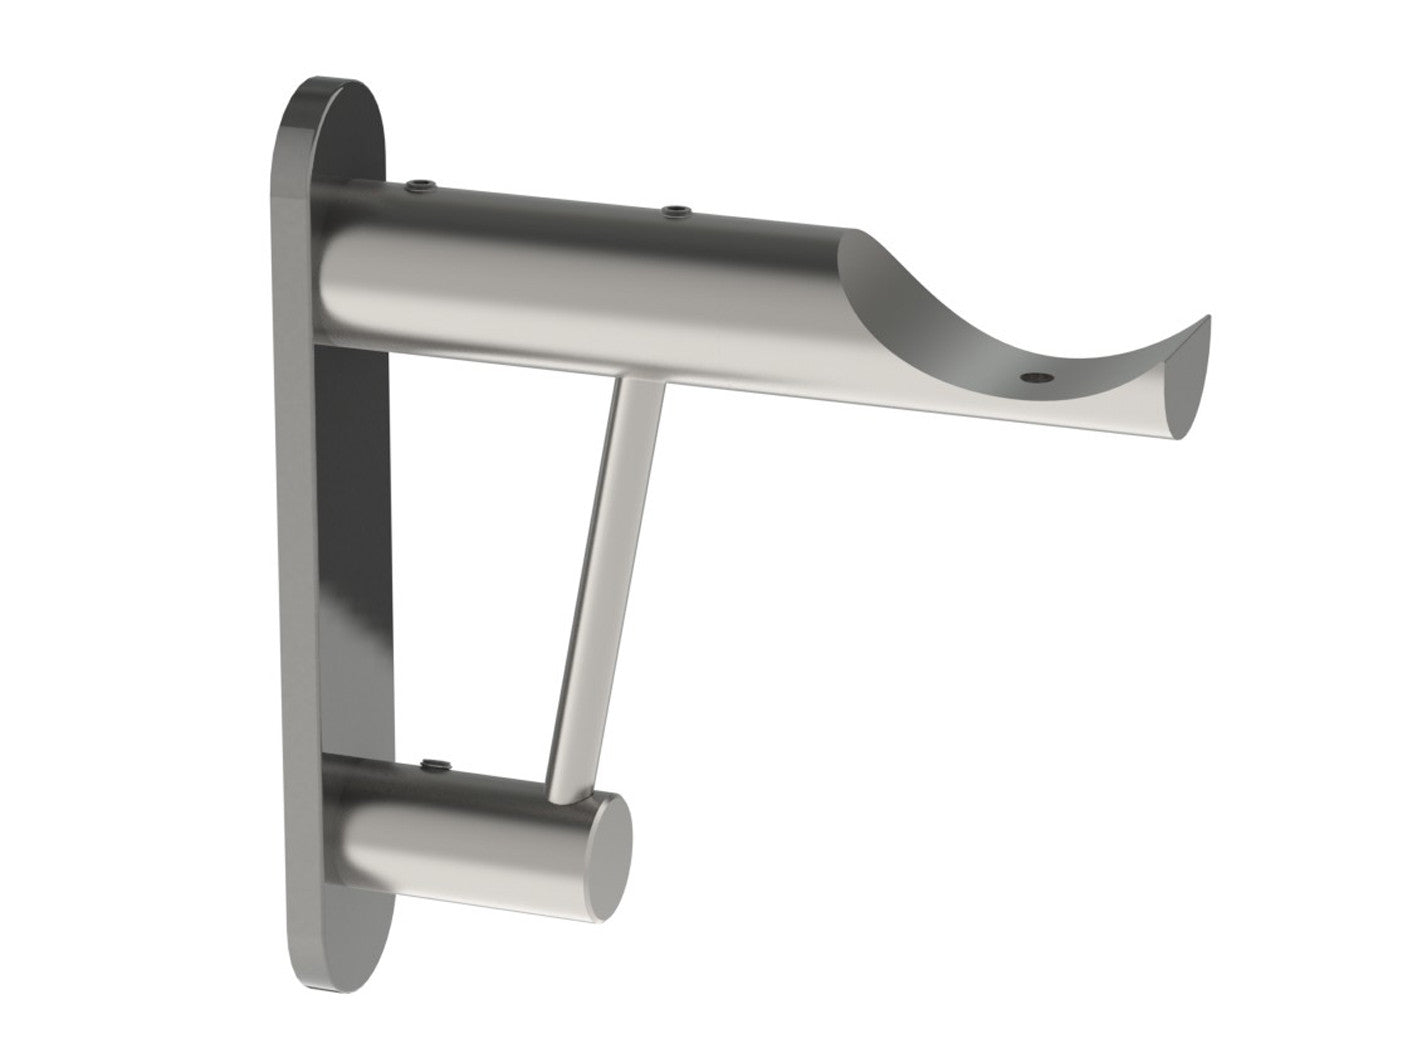 Stainless steel architrave bracket for 50mm diameter for wooden curtain poles